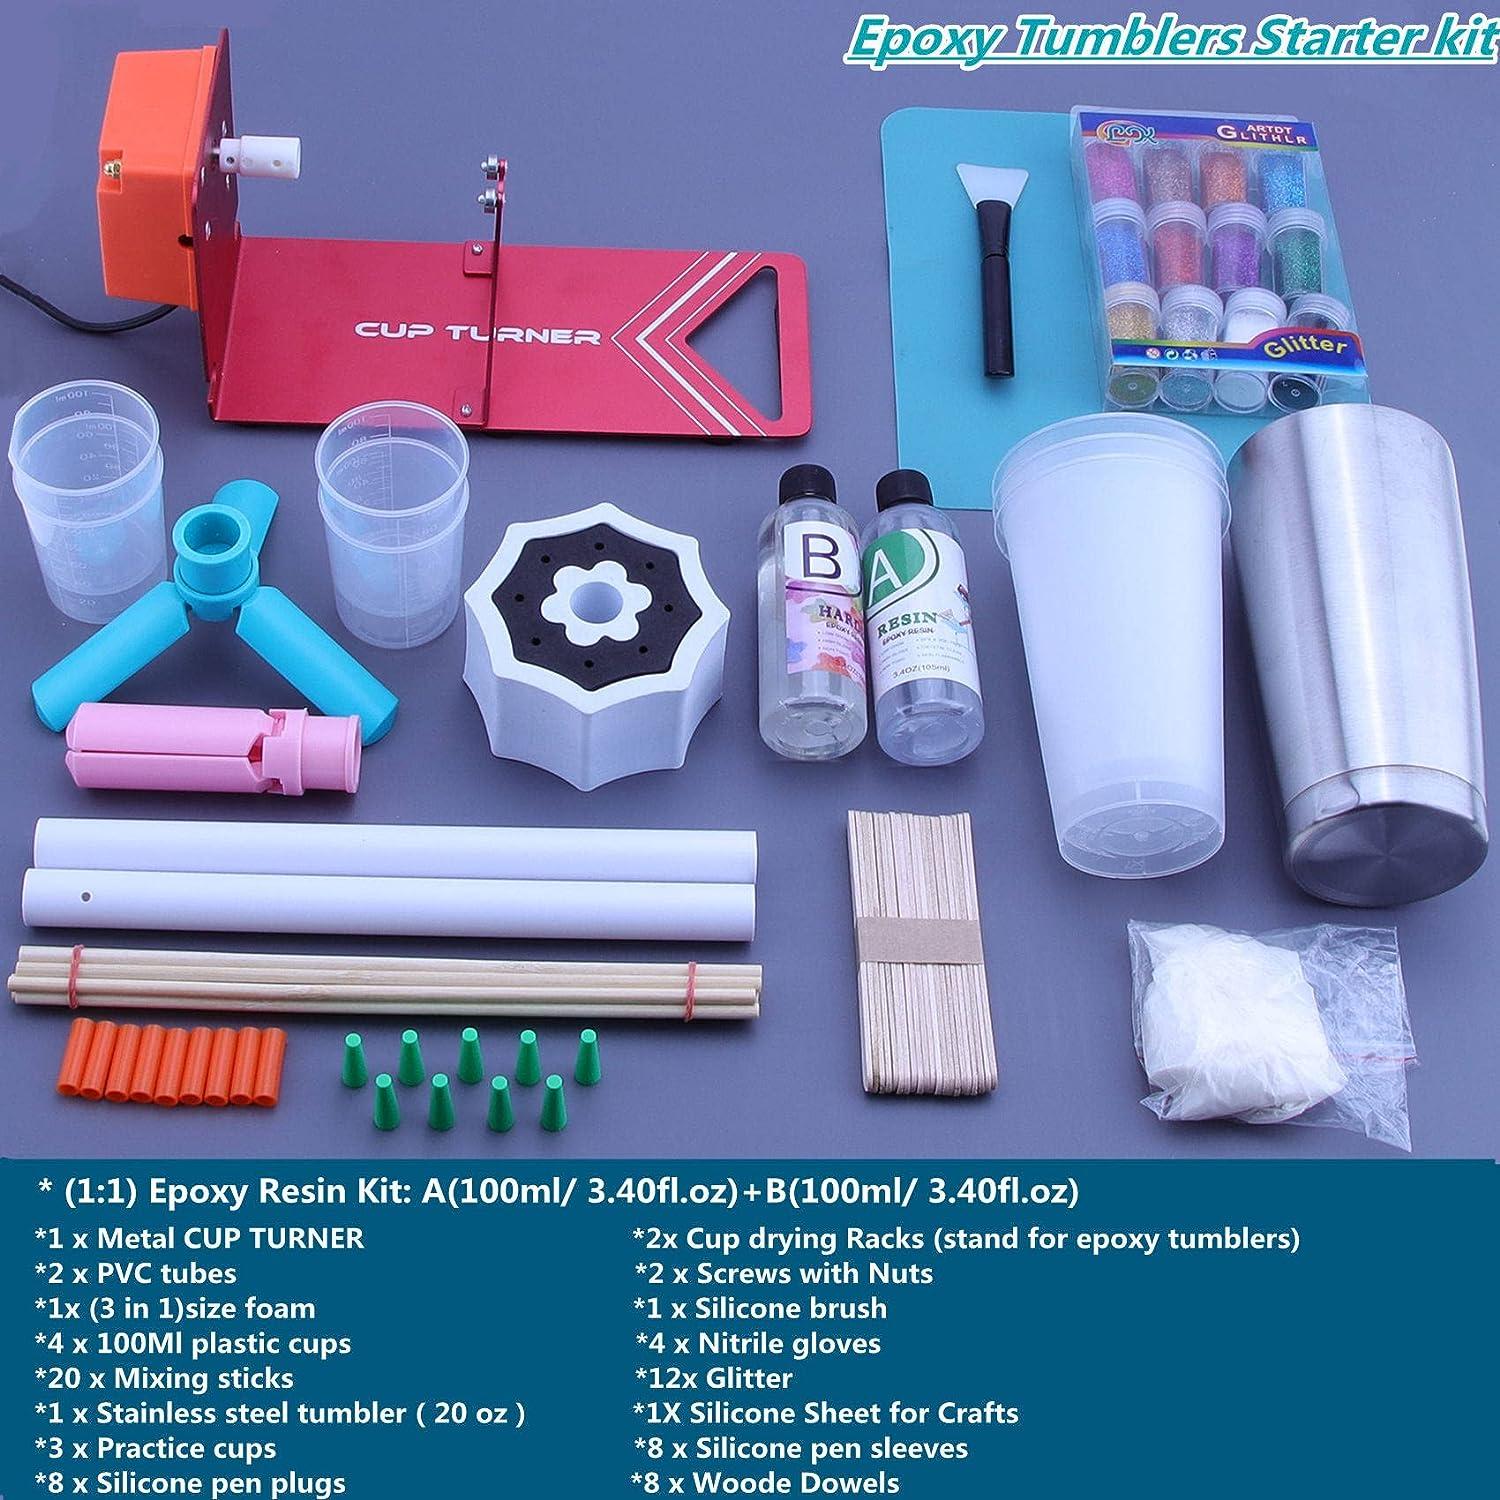  Tumbler Turner Kit with Epoxy Resin for Tumblers, Cup